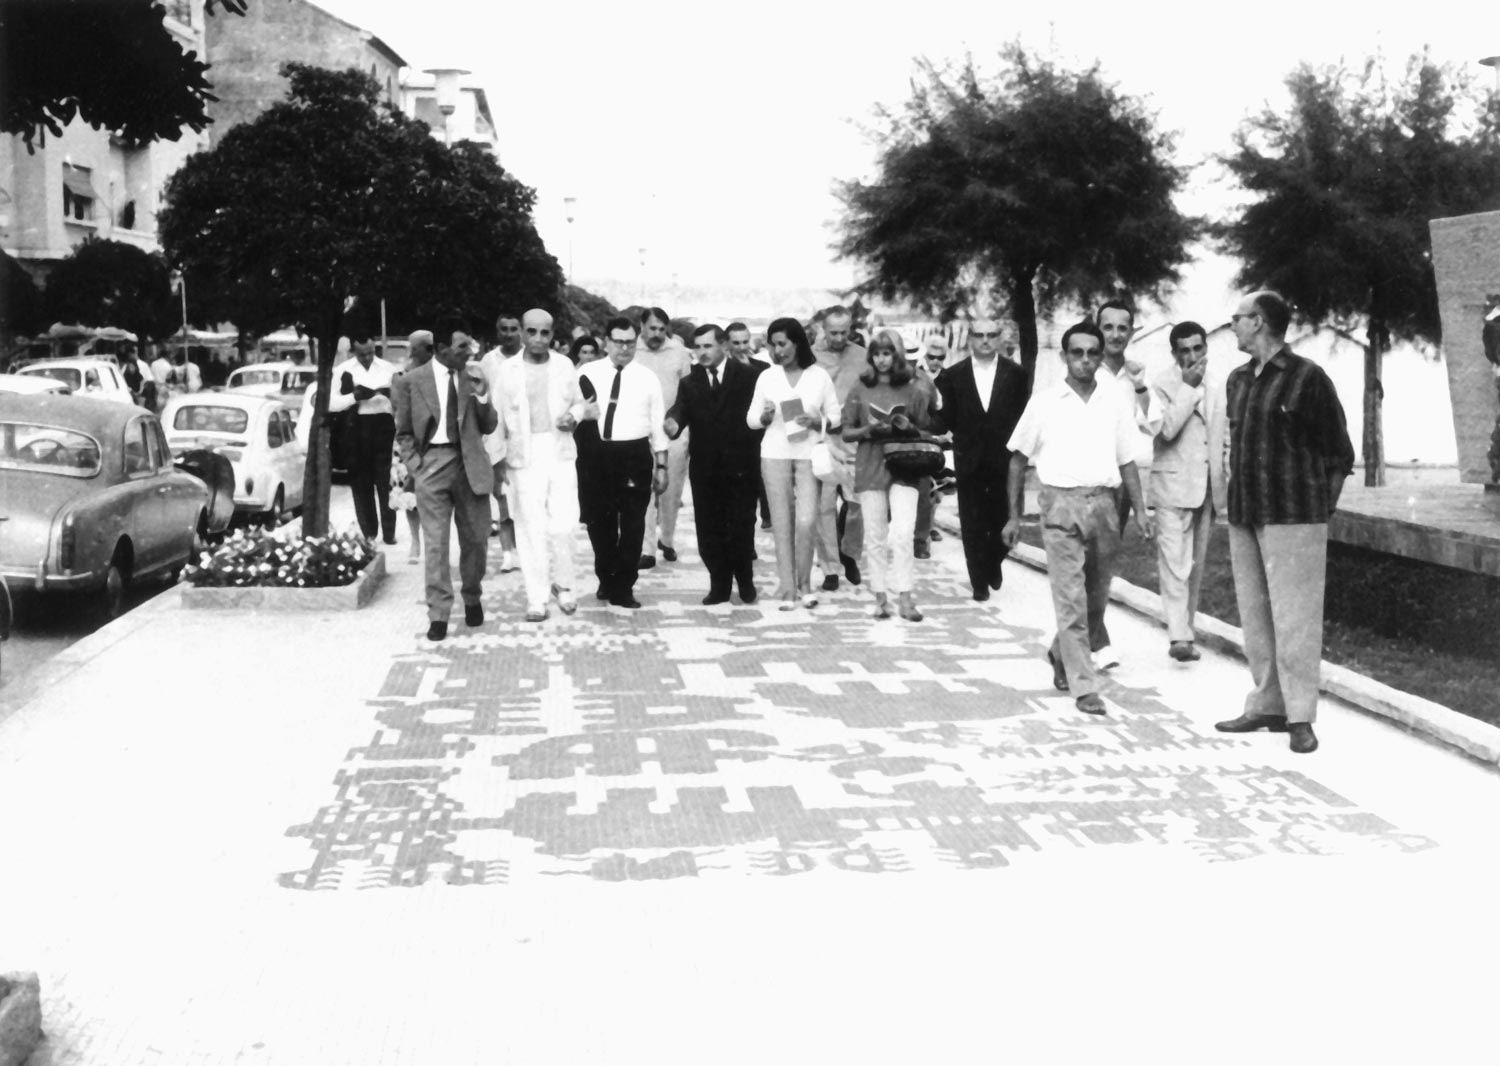 August 10, 1963, inauguration of the artists' promenade